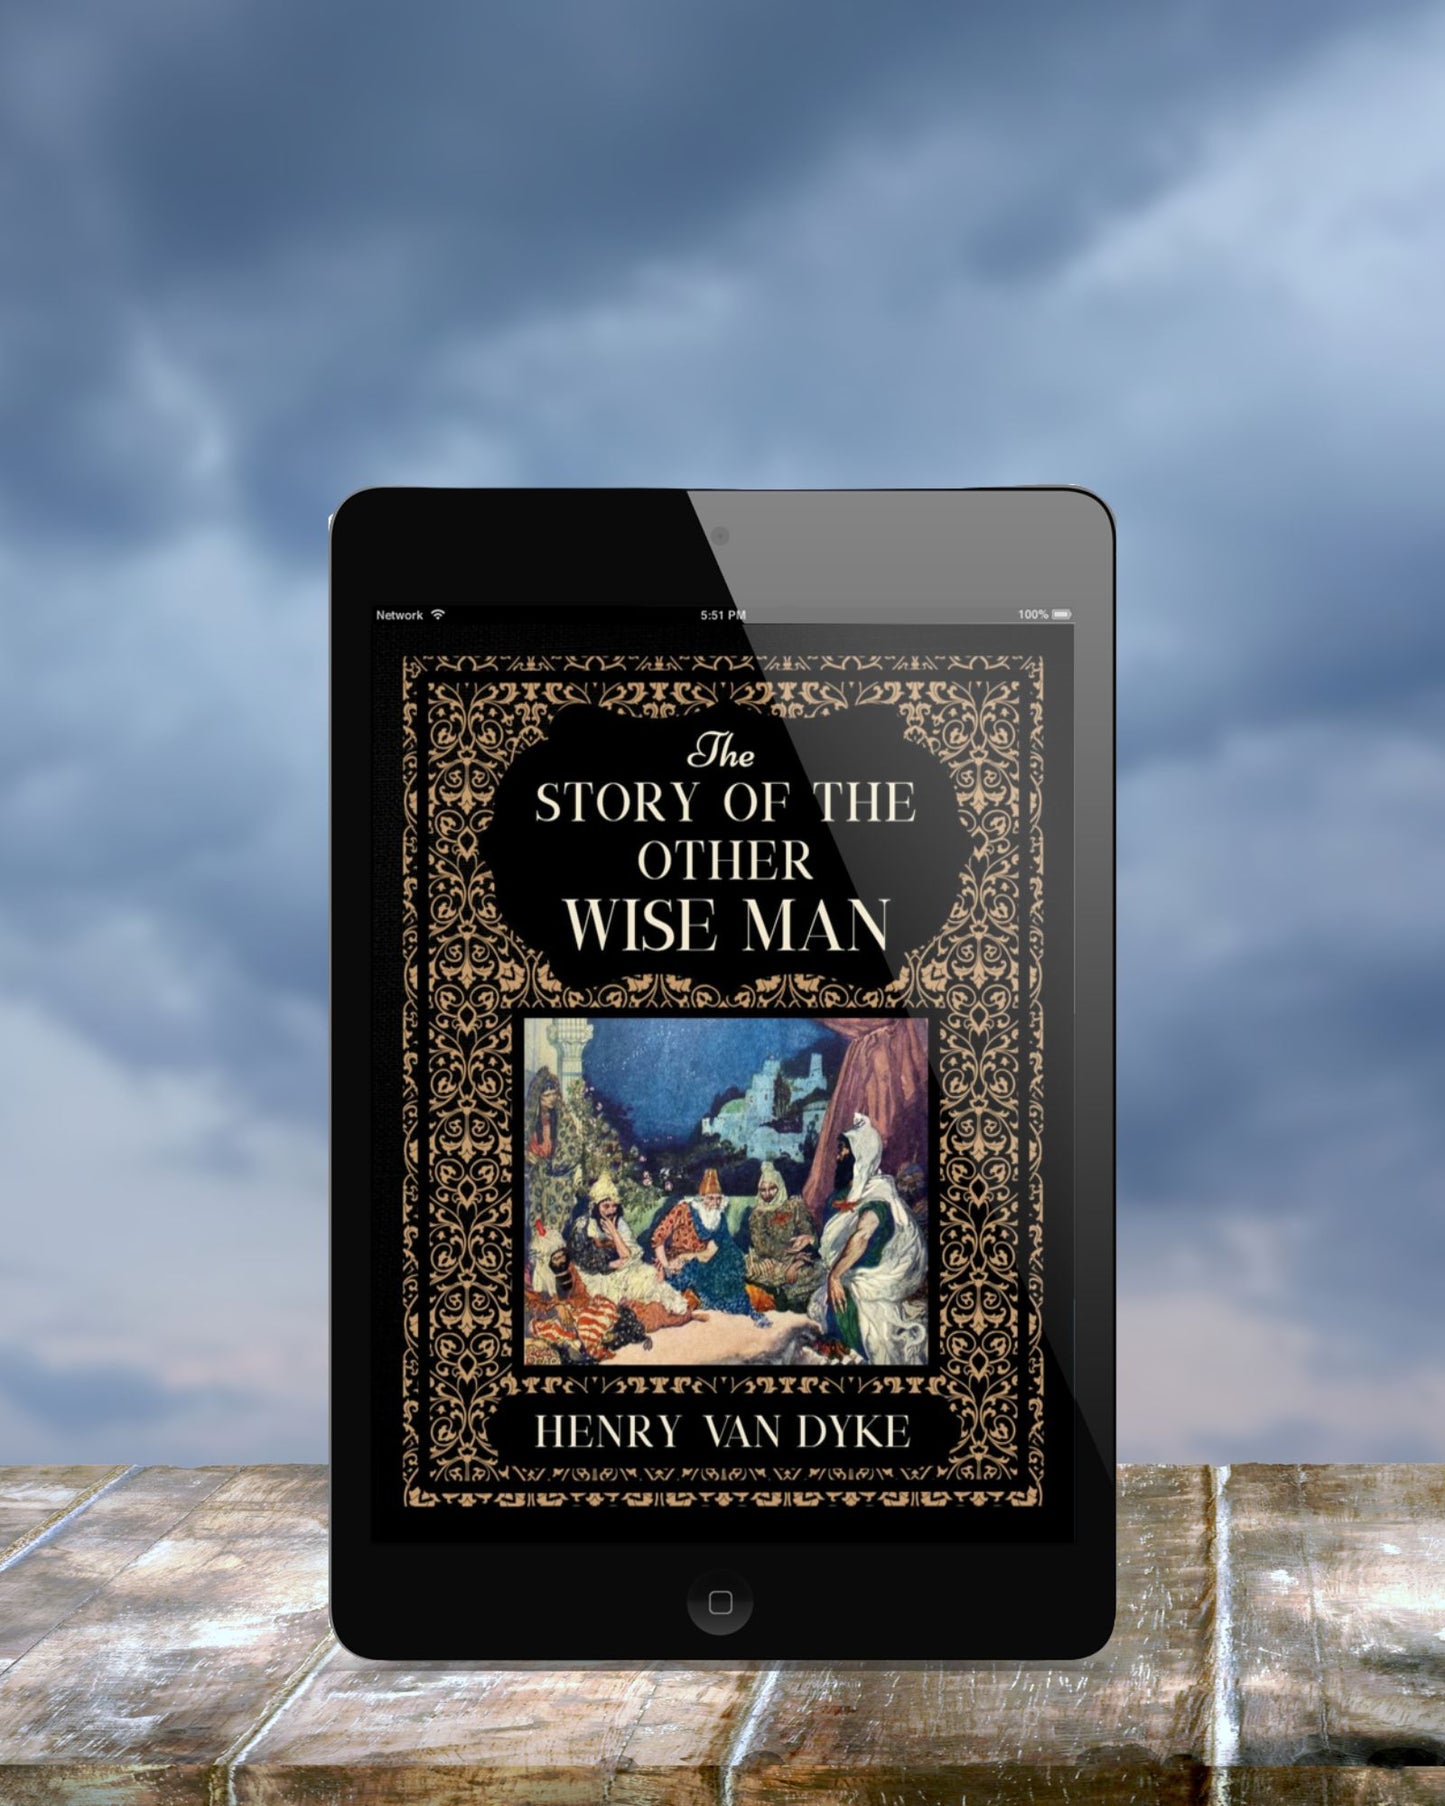 Black tablet standing upright on a brick wall in front of grey clouds. The ebook on display is the ornate black and gold cover of "The Story of the Other Wise Man."